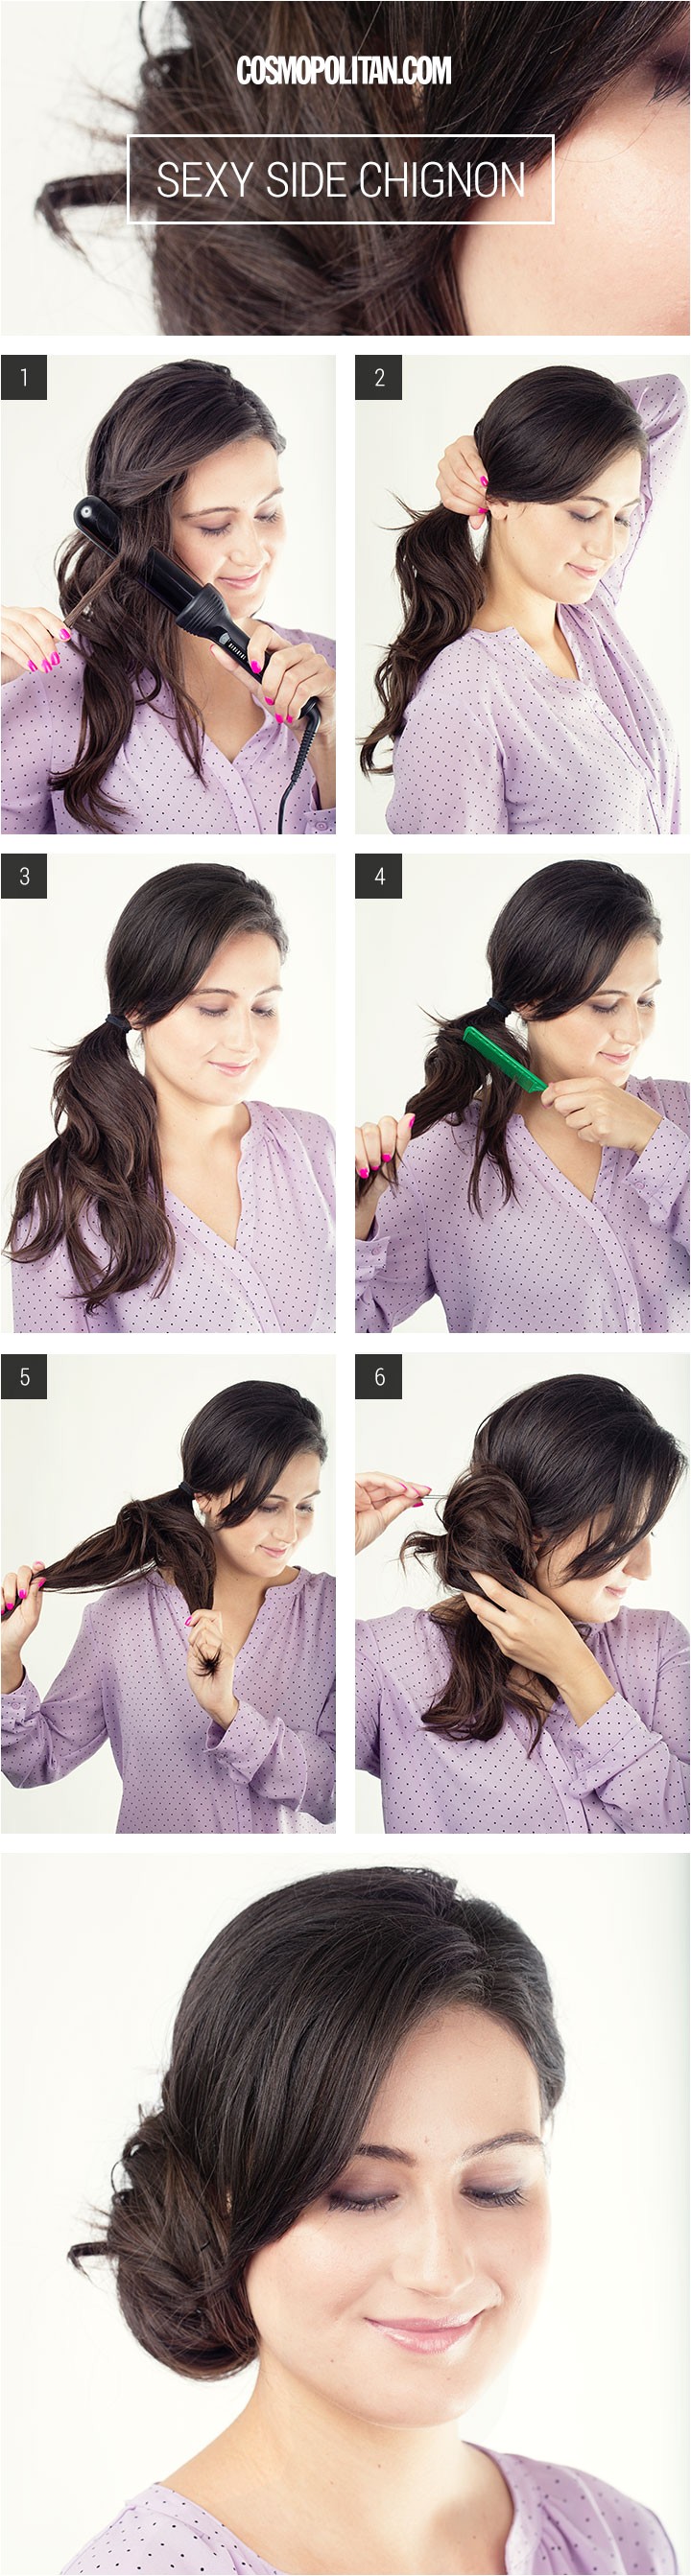 easy hairstyles every woman can five minutes